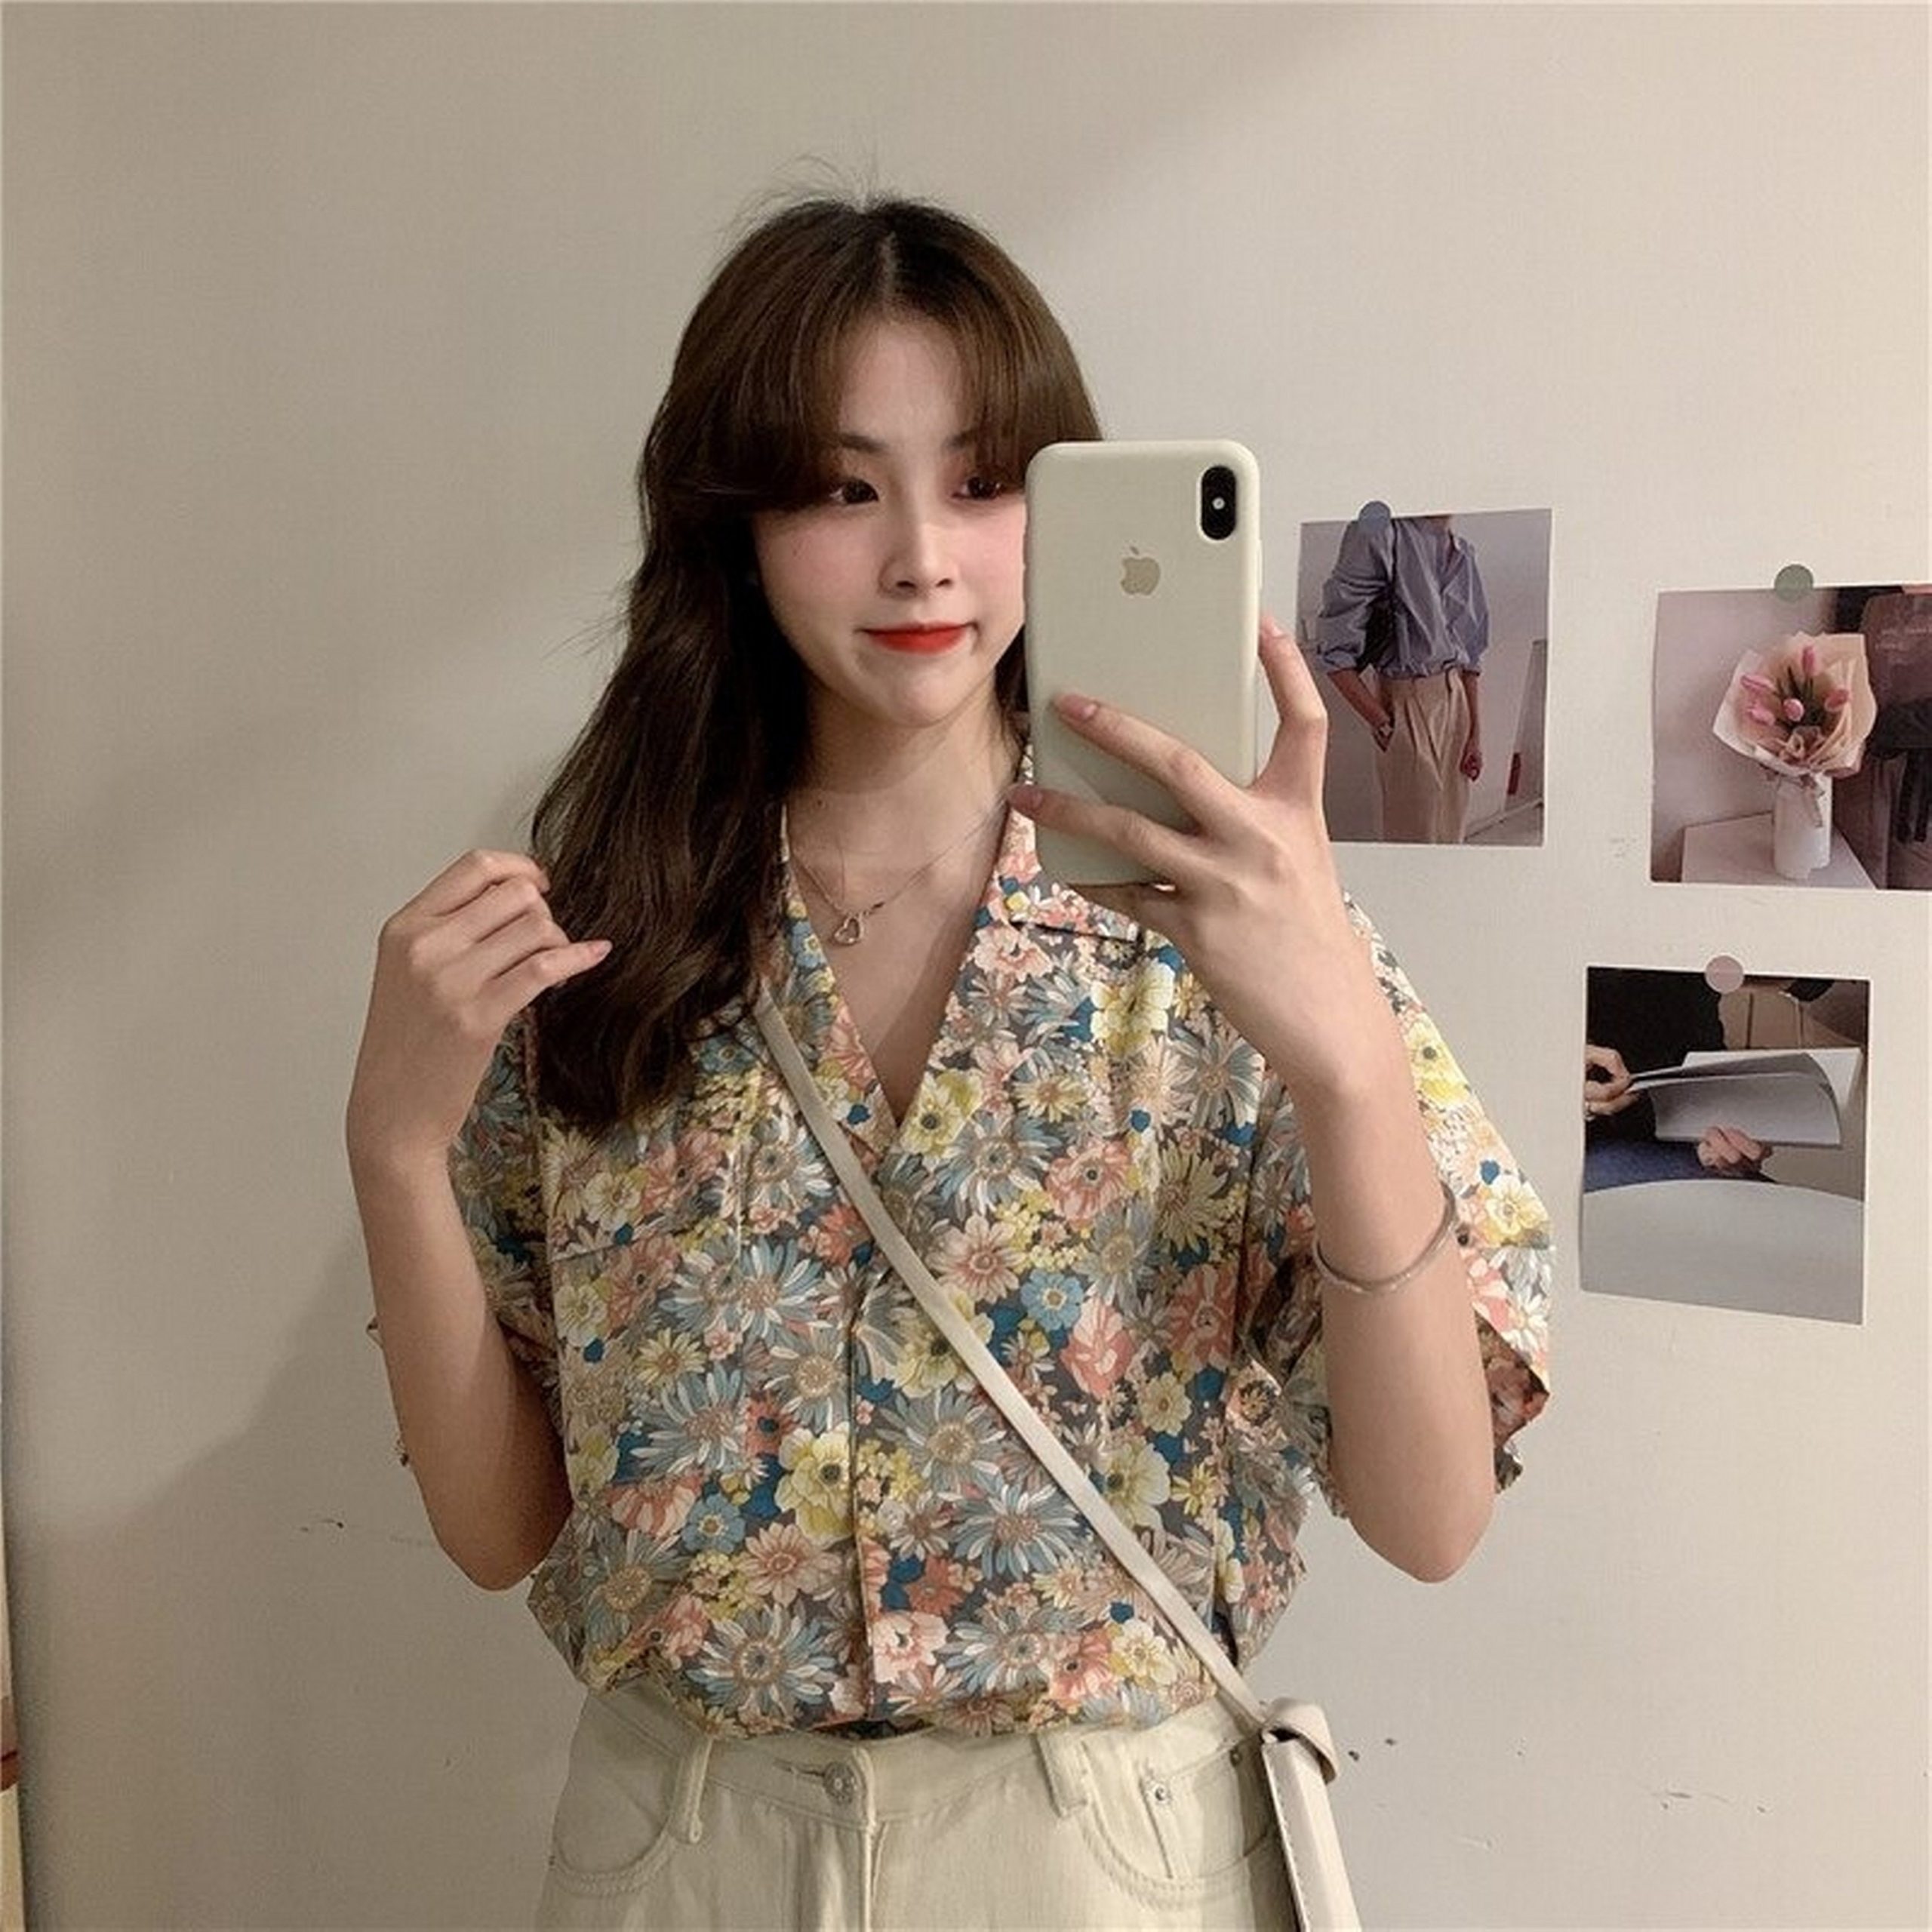 Floral Print Flower Pattern Chiffon Loose Short Sleeve Button Up Shirt Retro Vintage Trends Cute Aesthetic Fashion